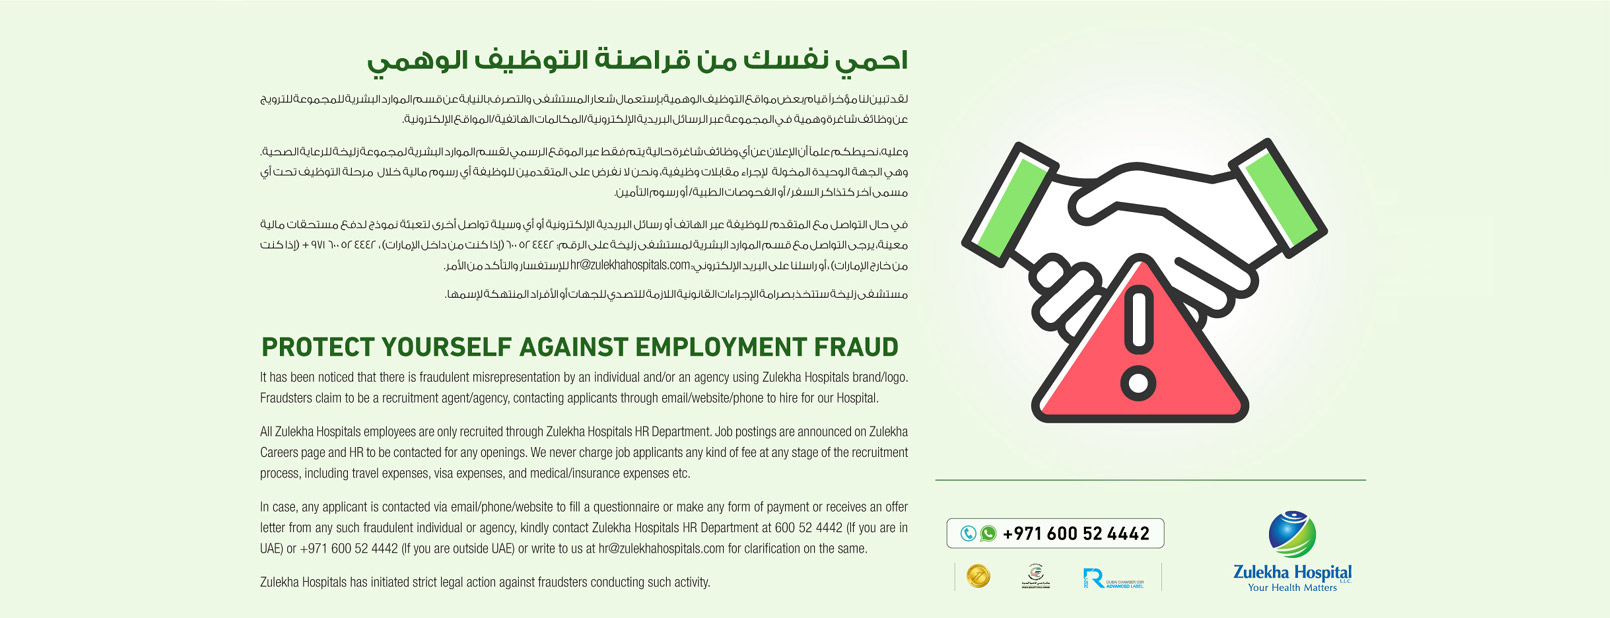 zulekha-promotions-PROTECT-YOURSELF-AGAINST-FRAUD-01.jpg